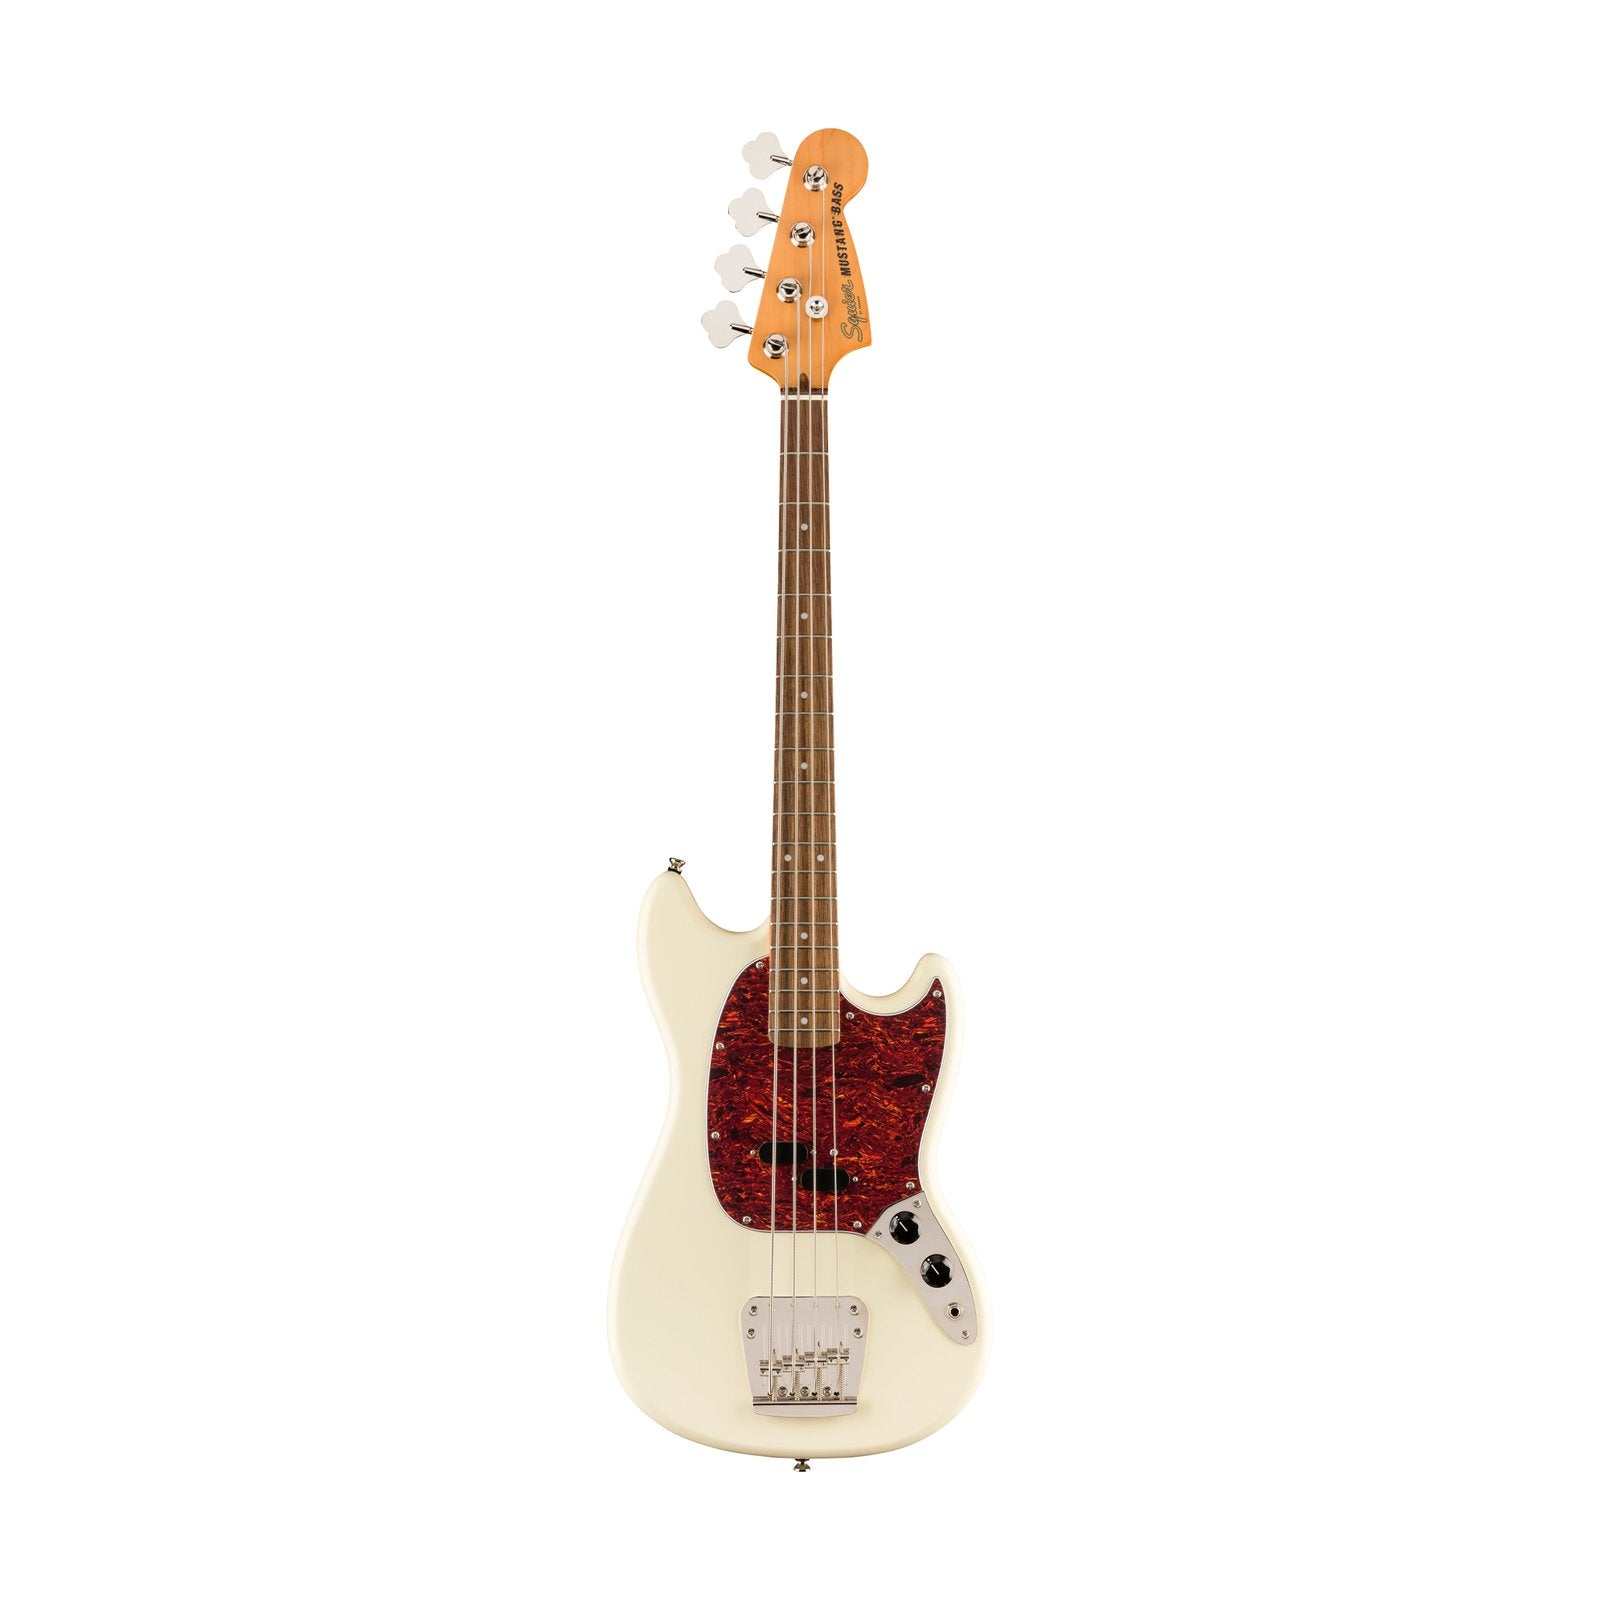 Squier Classic Vibe 60s Mustang Bass Guitar, Laurel FB, Olympic White, SQUIER BY FENDER, BASS GUITAR, squier-by-fender-bass-guitar-037-4570-505, ZOSO MUSIC SDN BHD